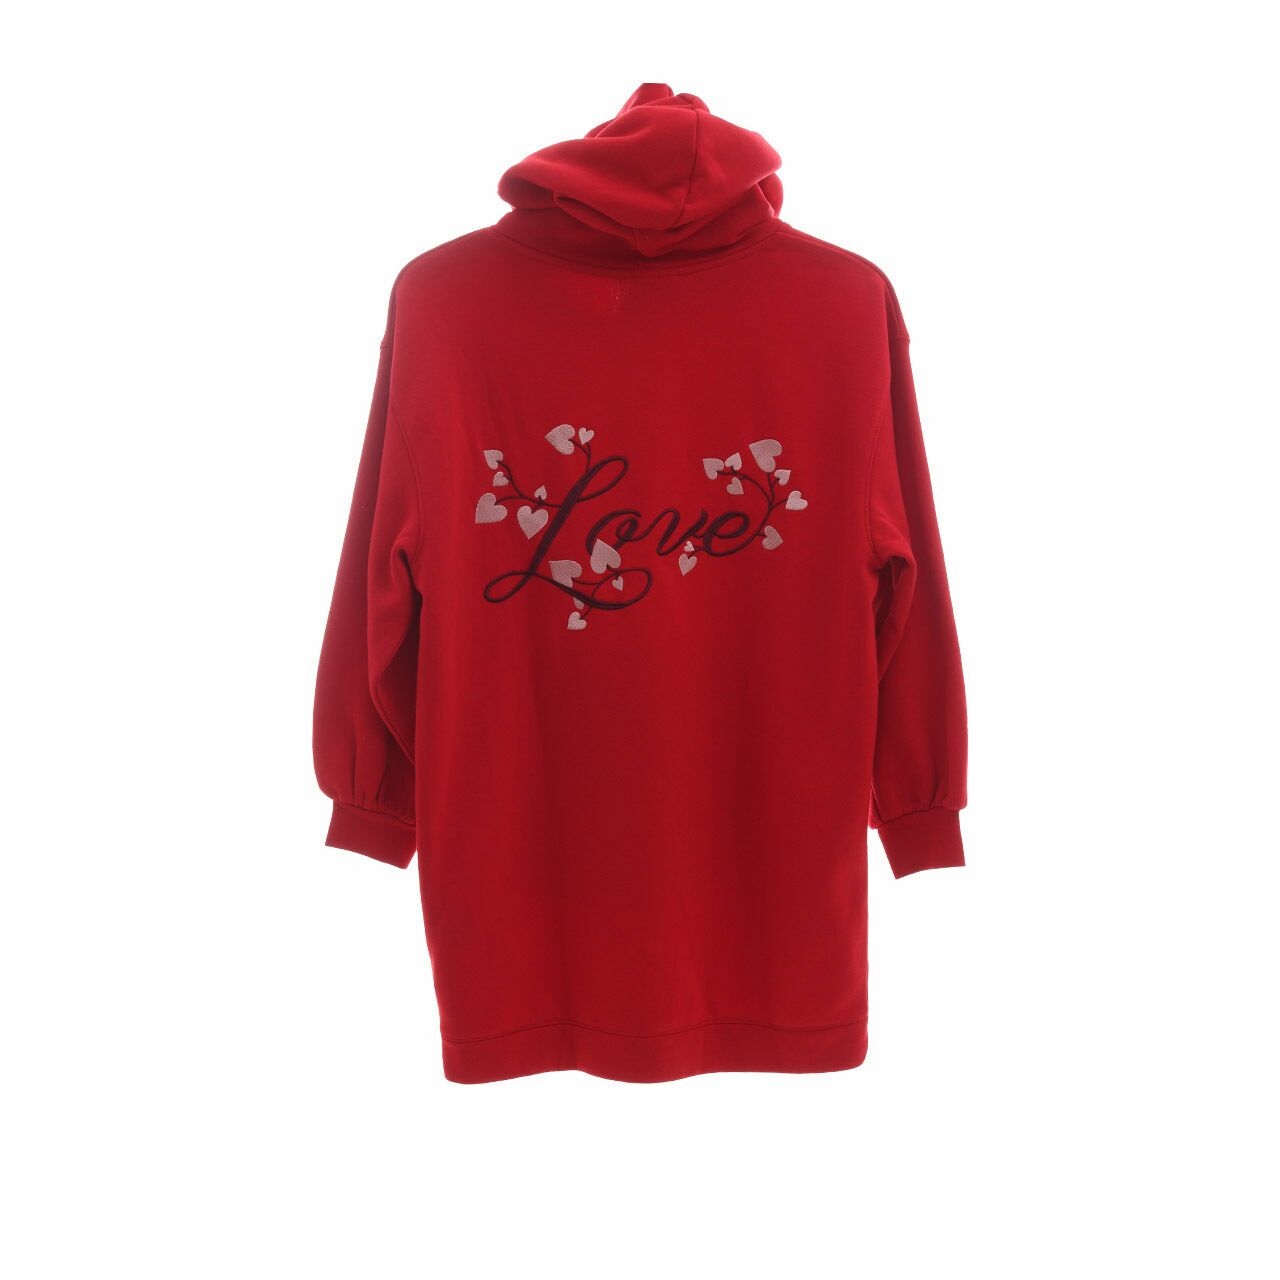 H&M Red Hoodie Sweater